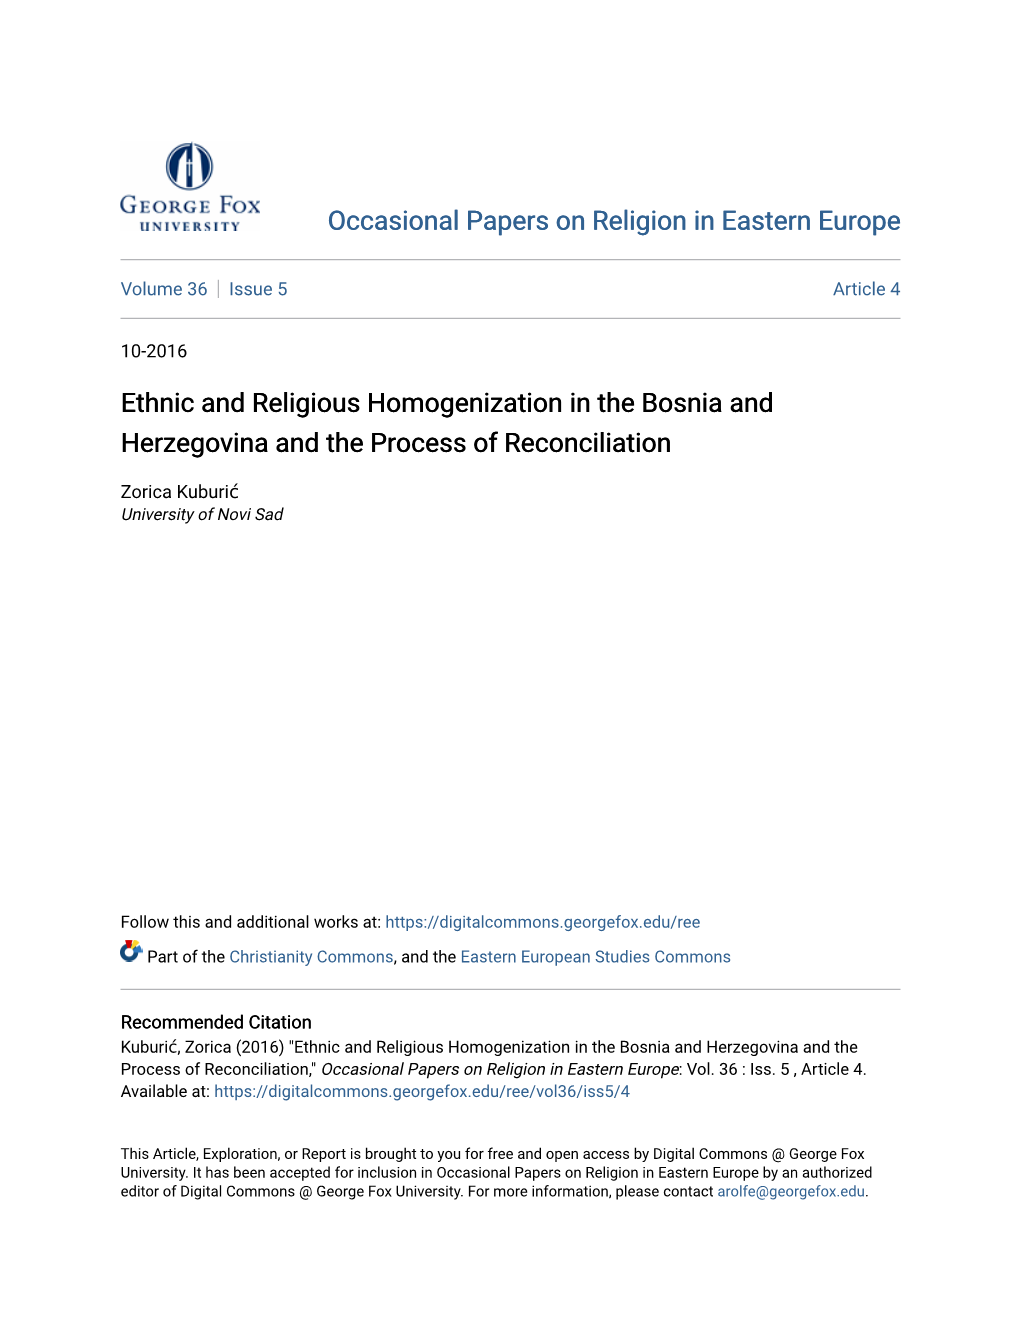 Ethnic and Religious Homogenization in the Bosnia and Herzegovina and the Process of Reconciliation